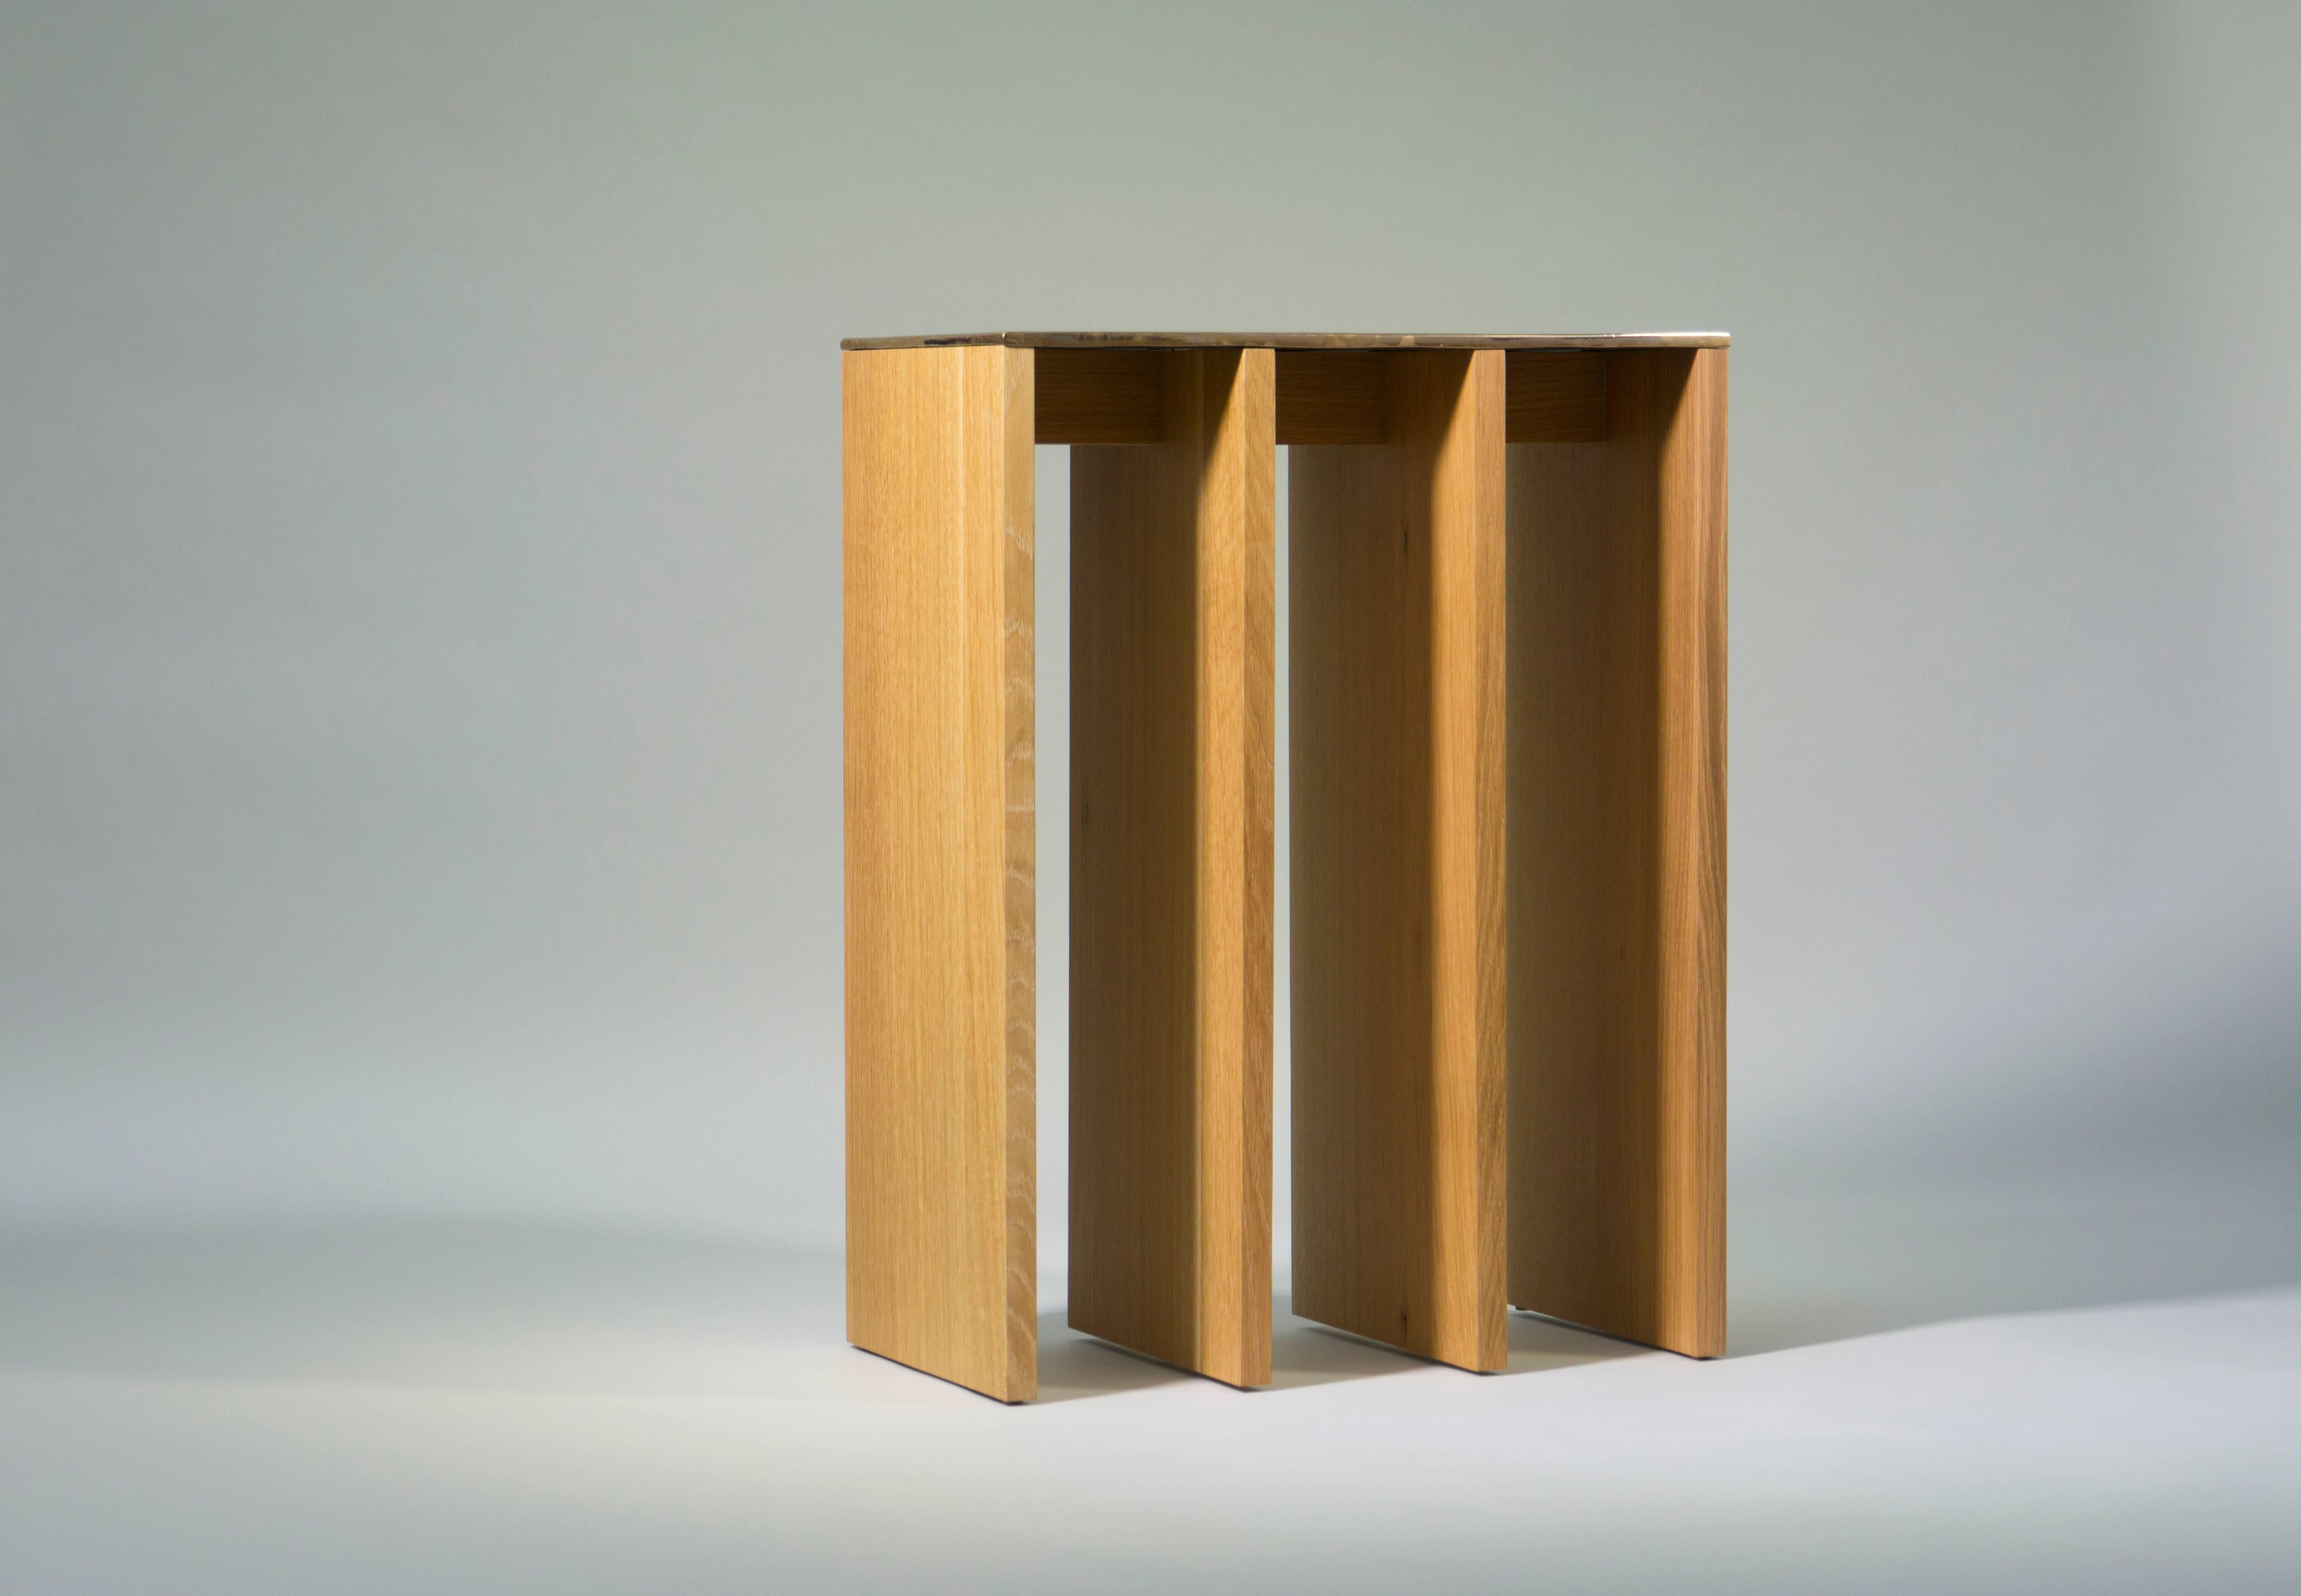 Console table in oak with polished bronze top by Tinatin Kilaberidze.
The geometric form of this console and apparent simplicity are emblematic of Tinatin's work. They make the piece elegant and timeless.